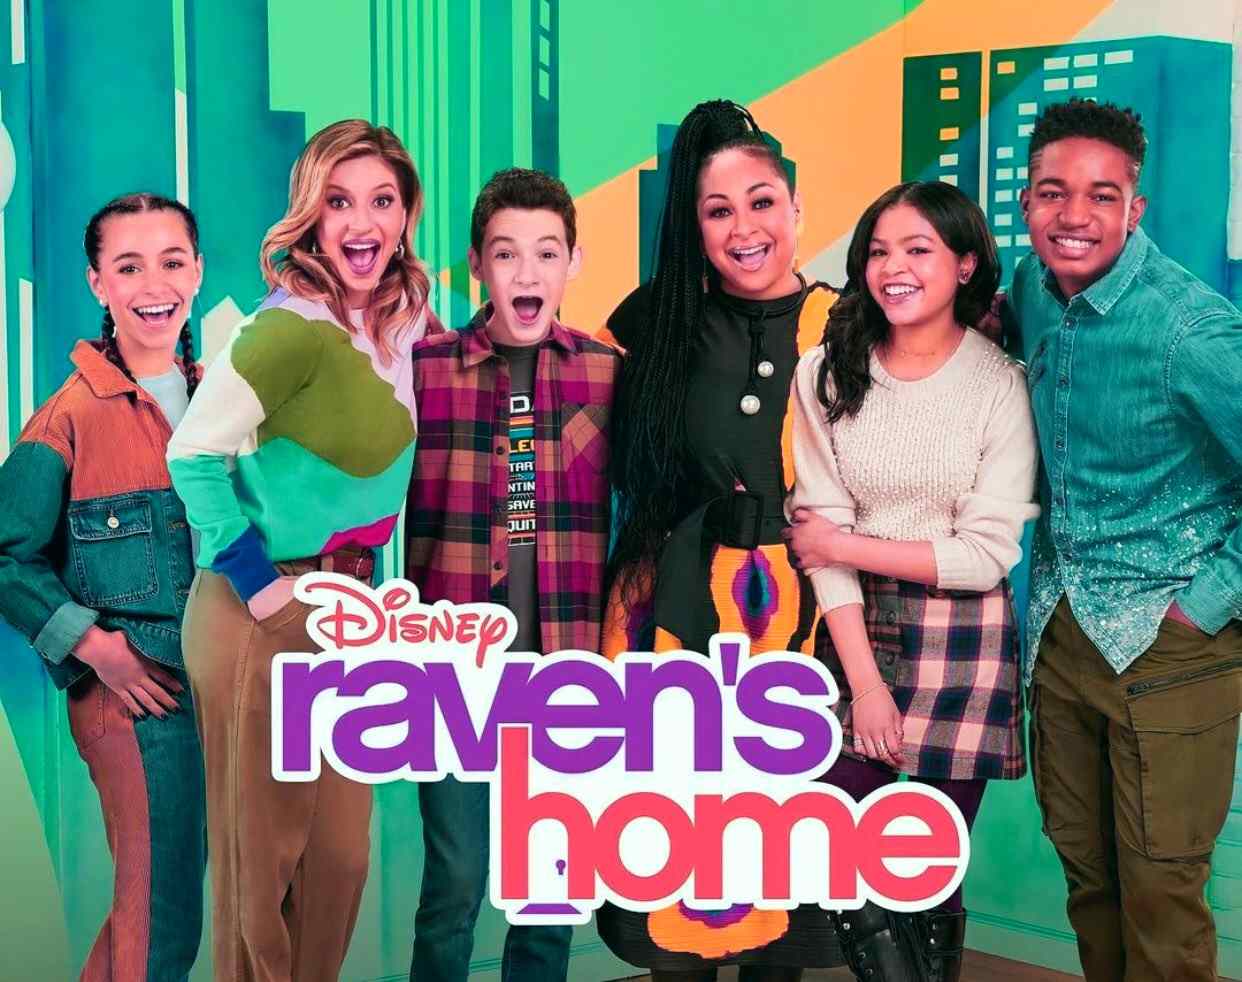 Raven's home Parents Guide | Raven's Home Age Rating | 2017